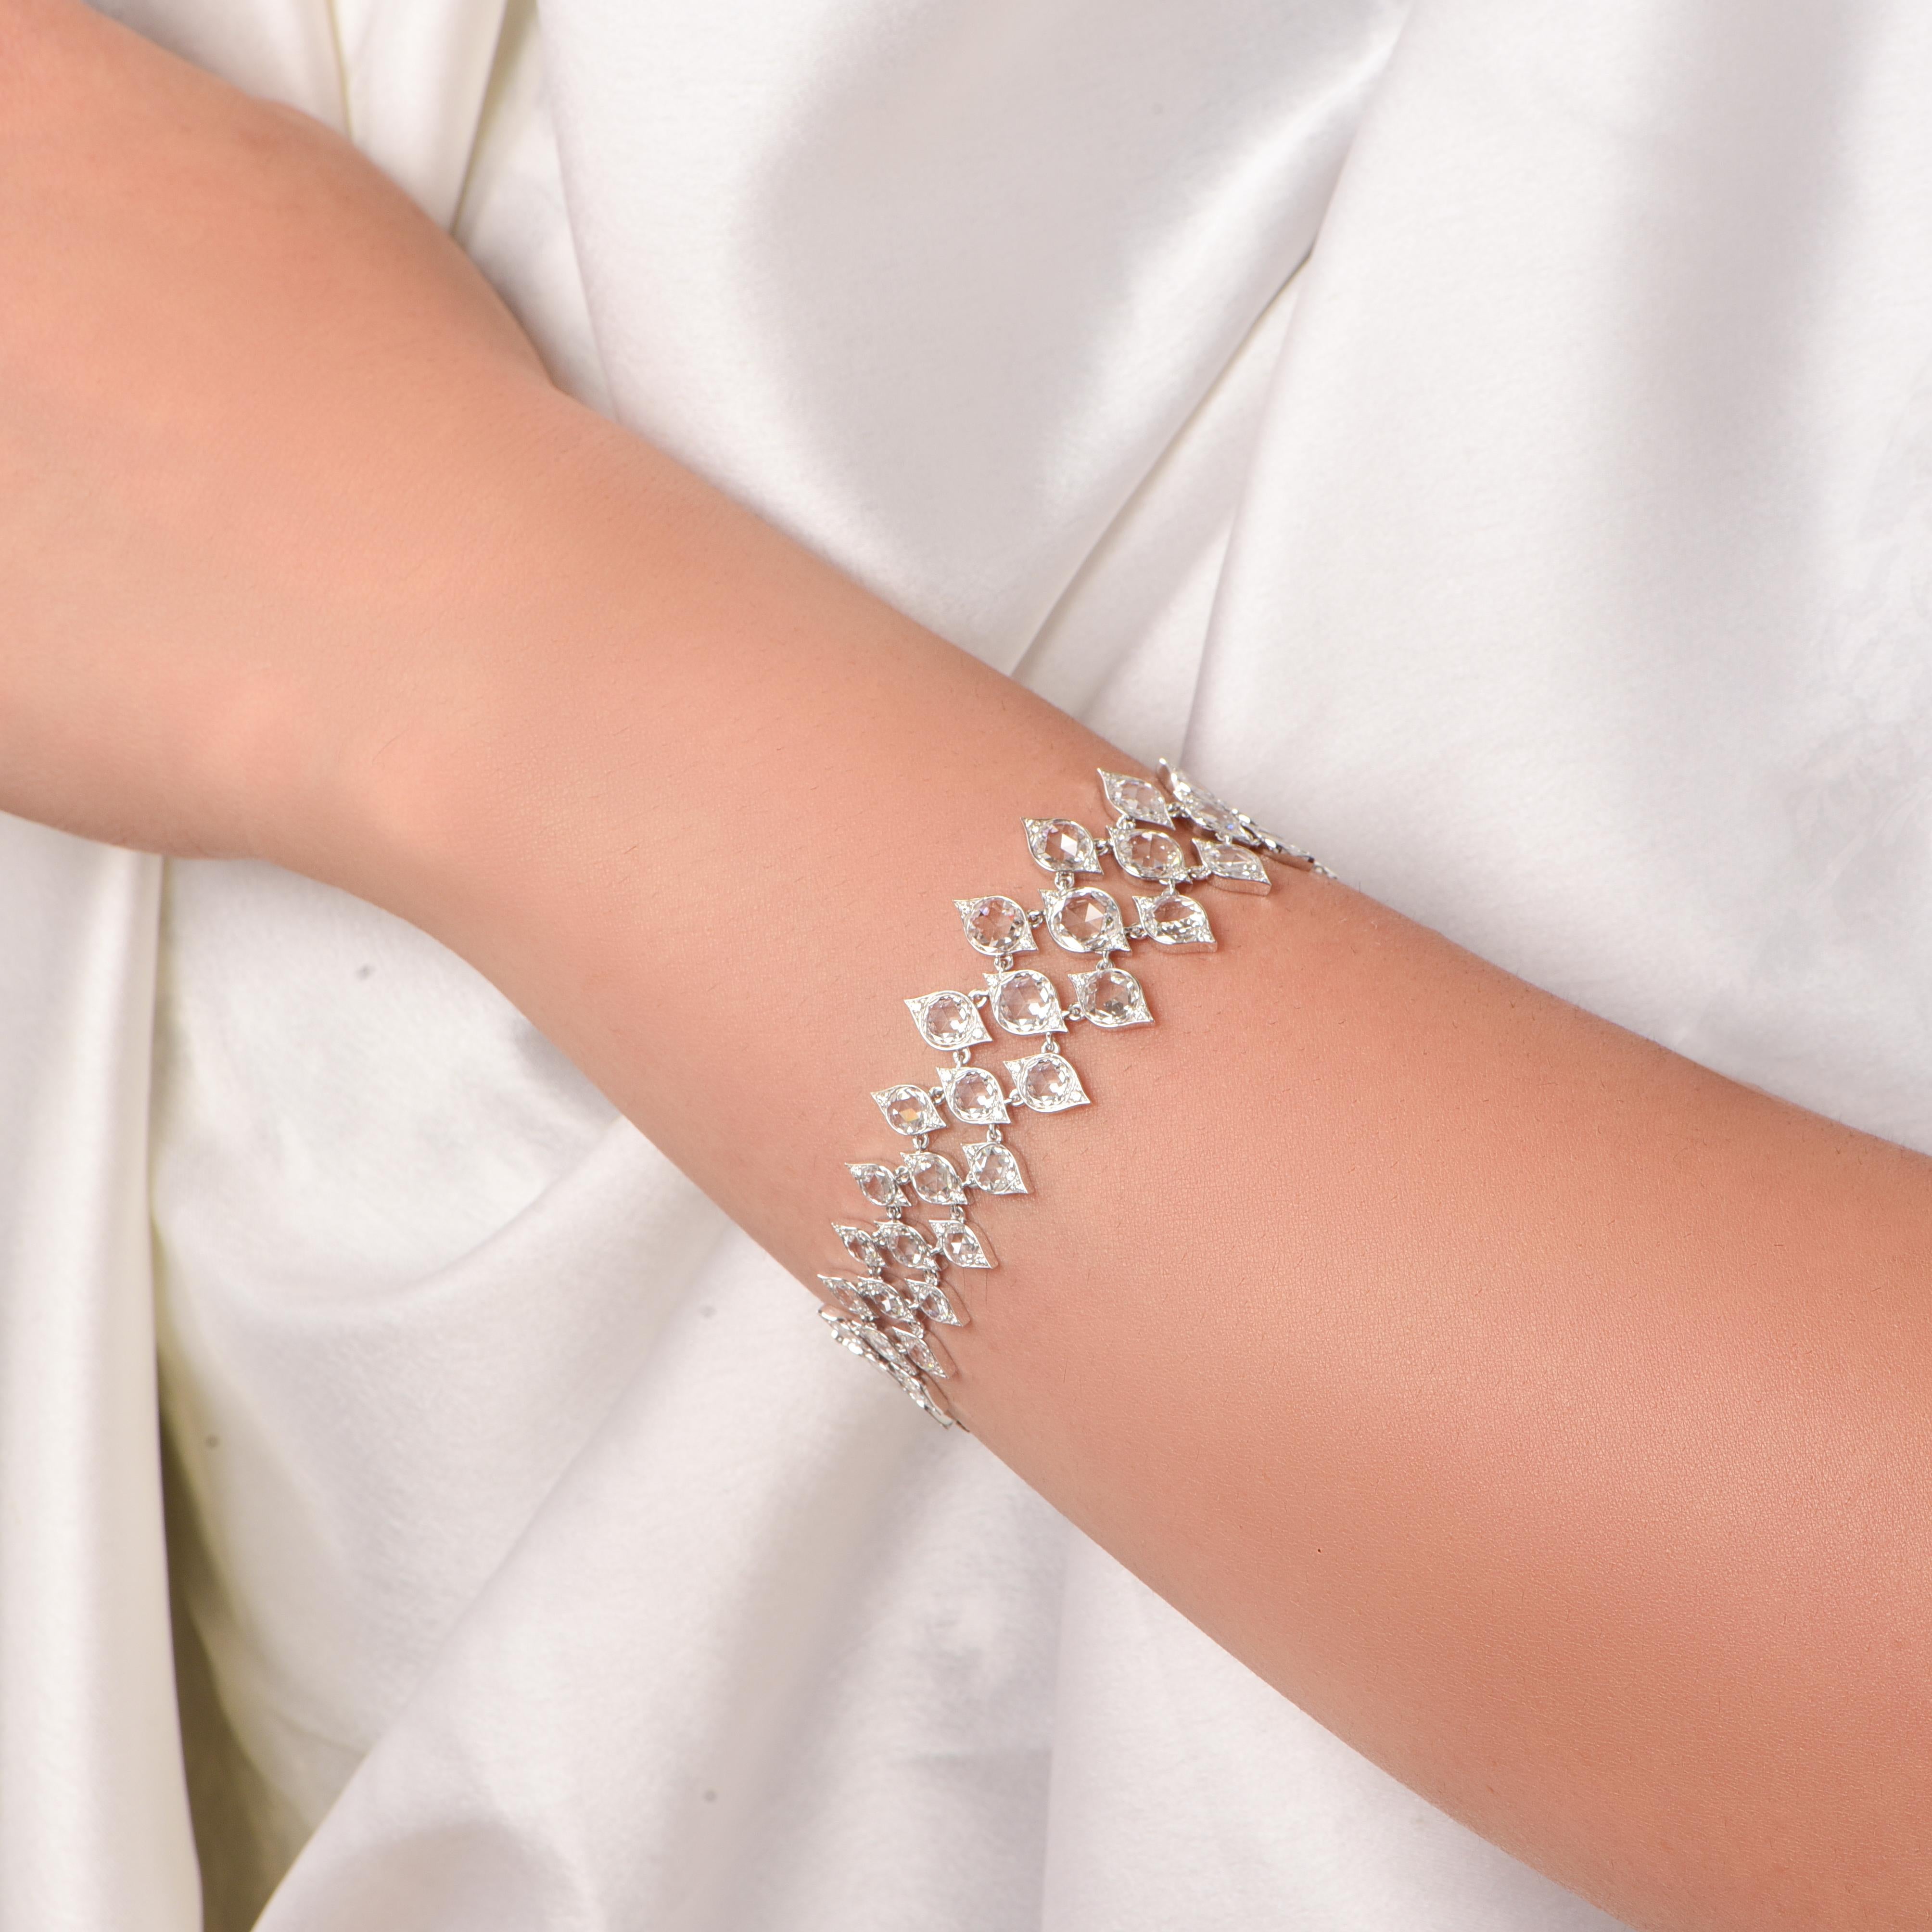 This elegant bracelet from our Haveli collection is studded with brilliant and rose cut diamonds. It is studded with 182 brilliant cut, 72 rose cut round diamonds, crafted to perfection. The diamonds are graded as D-F color and IF-VS clarity. 

This